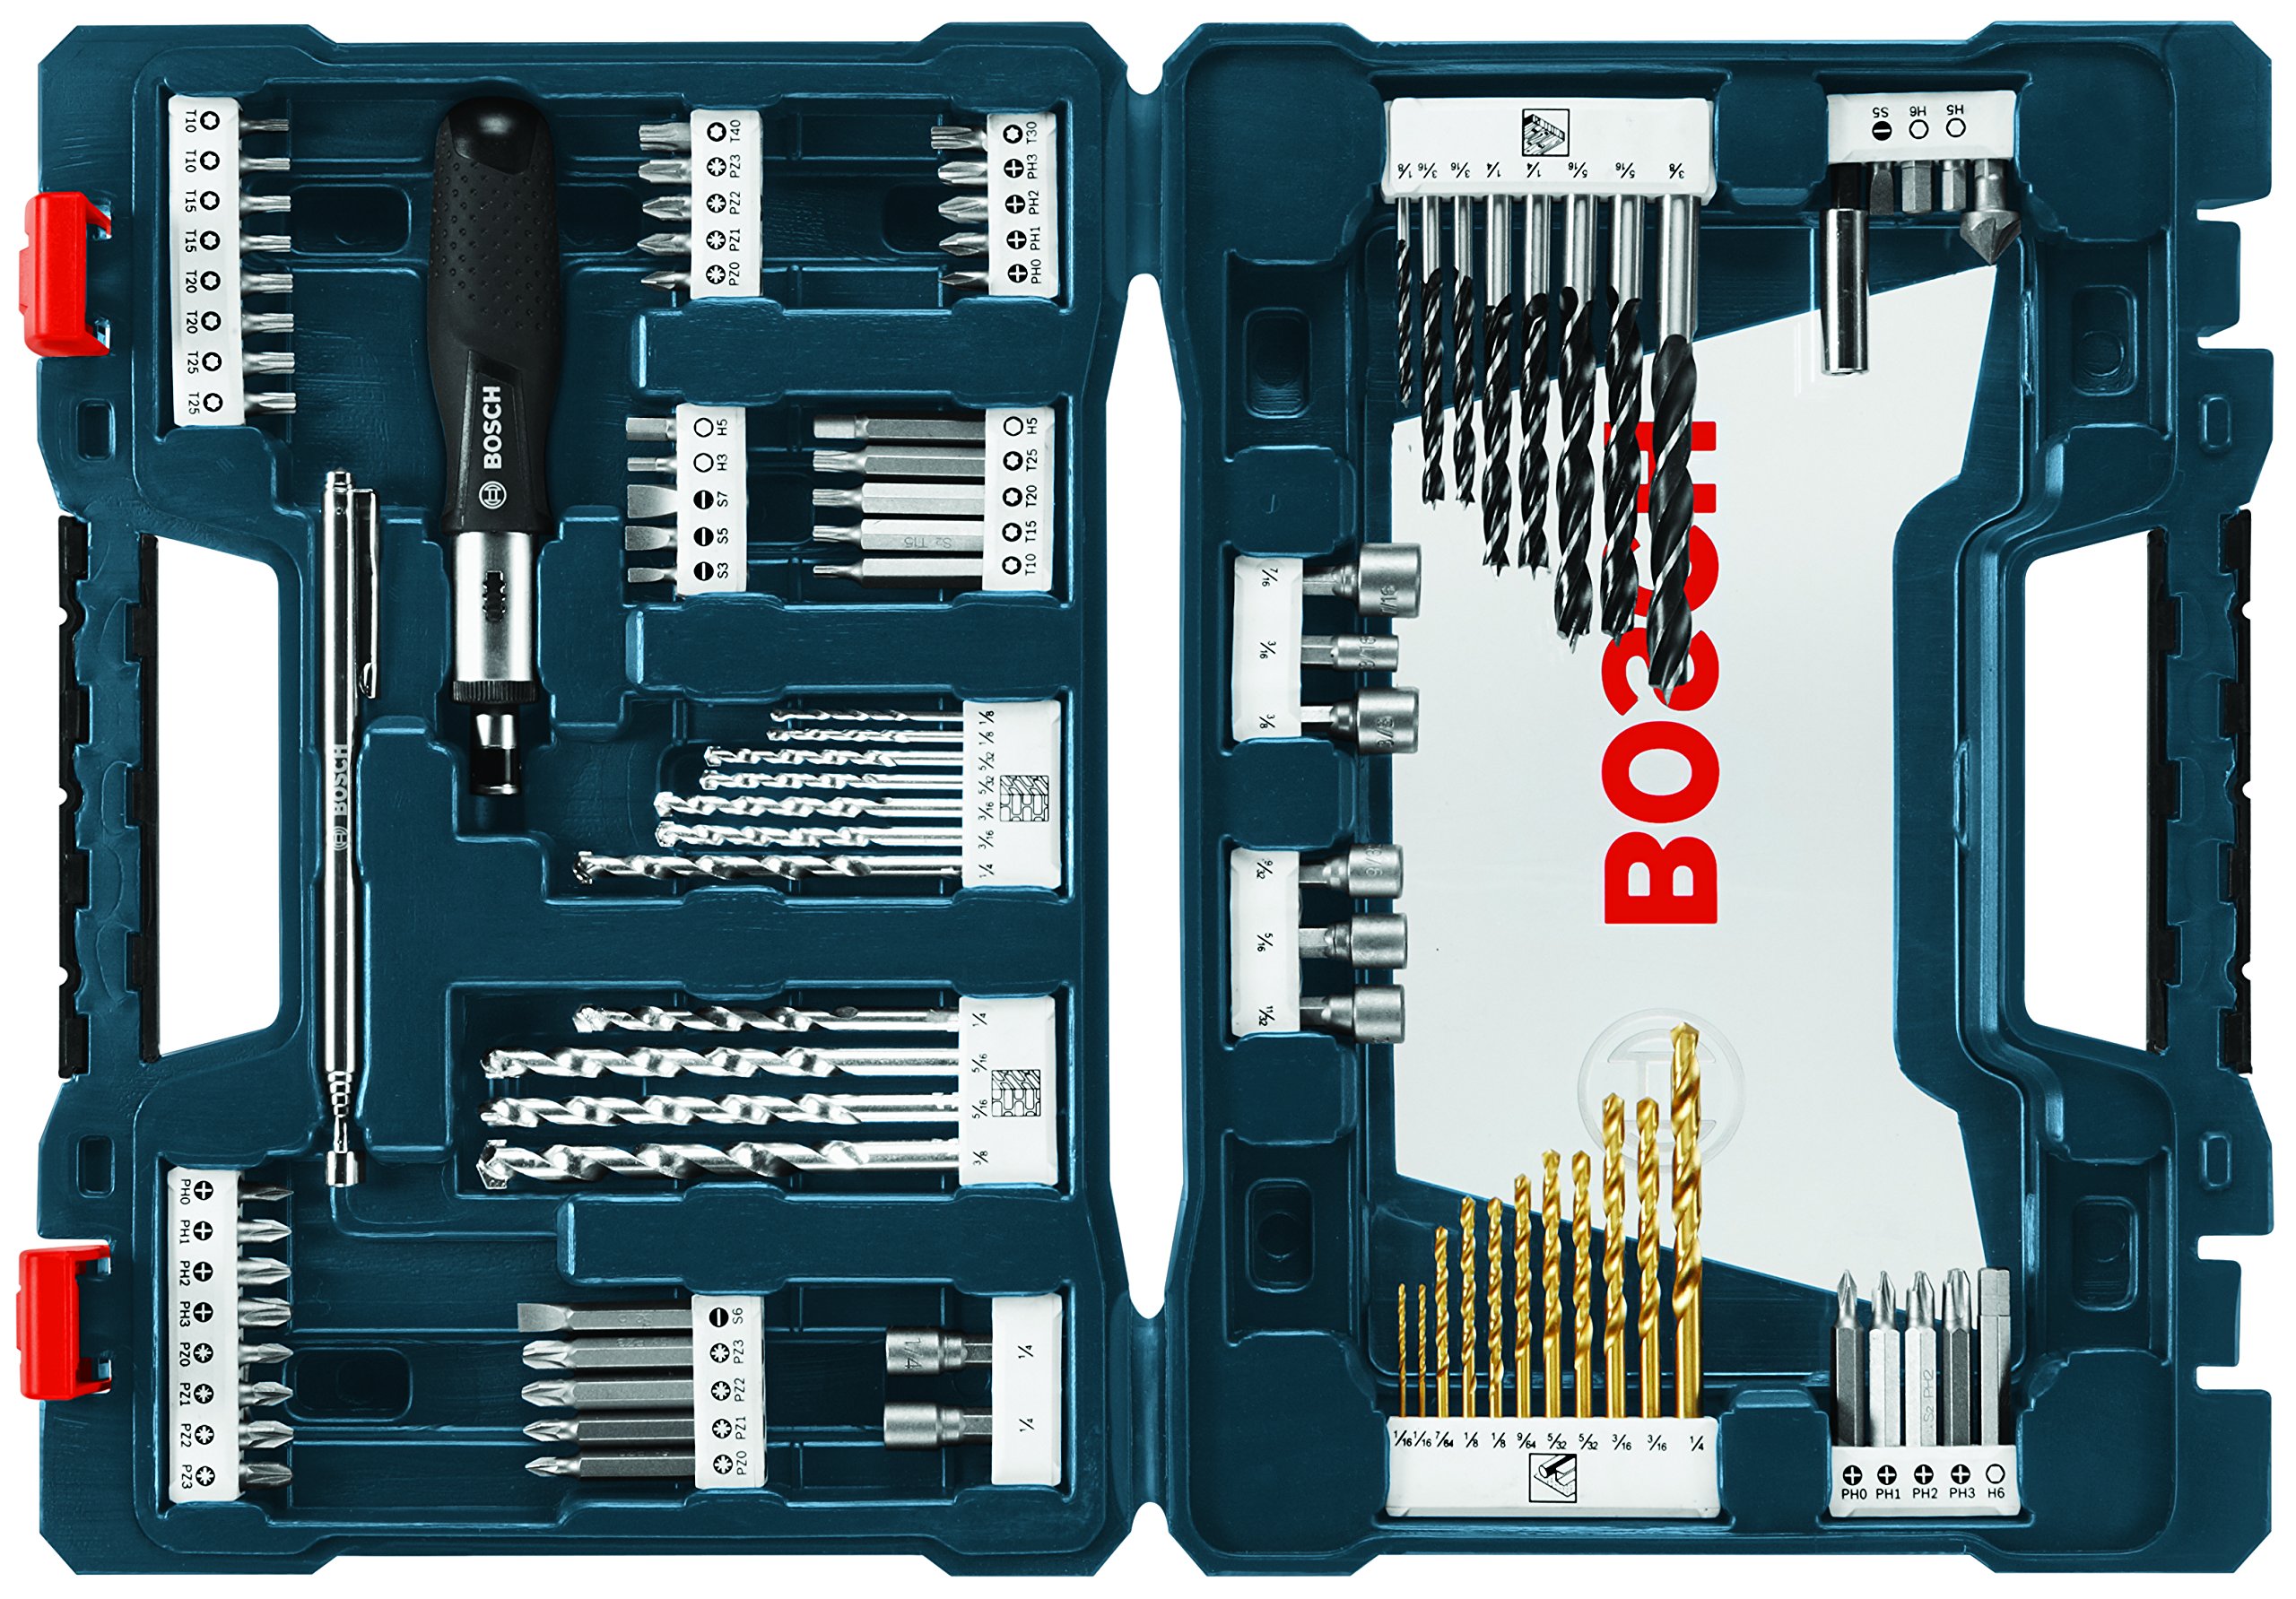 91-Piece BOSCH MS4091 Mixed Drilling / Driving Bit Set w/Case $41.98 + Free Shipping